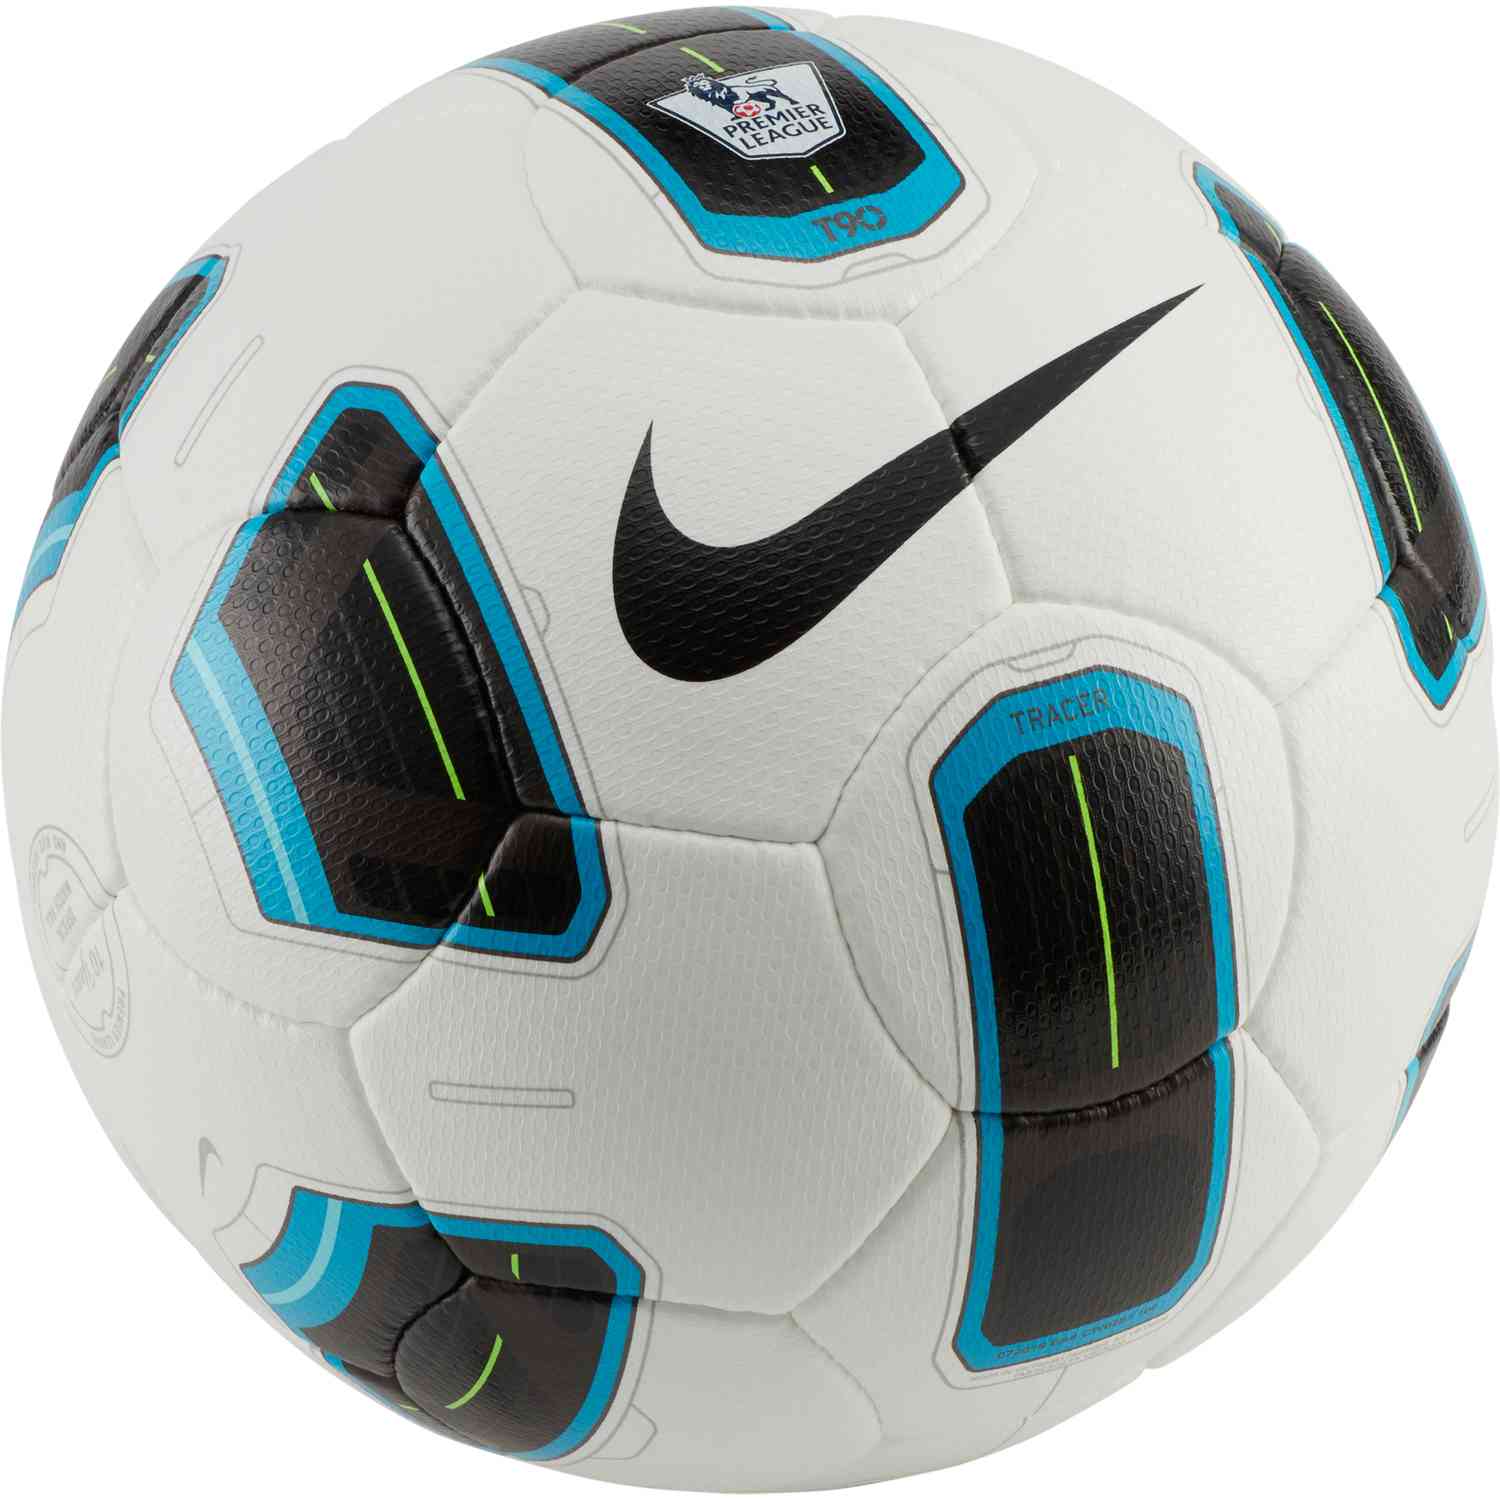 t90 tracer ball